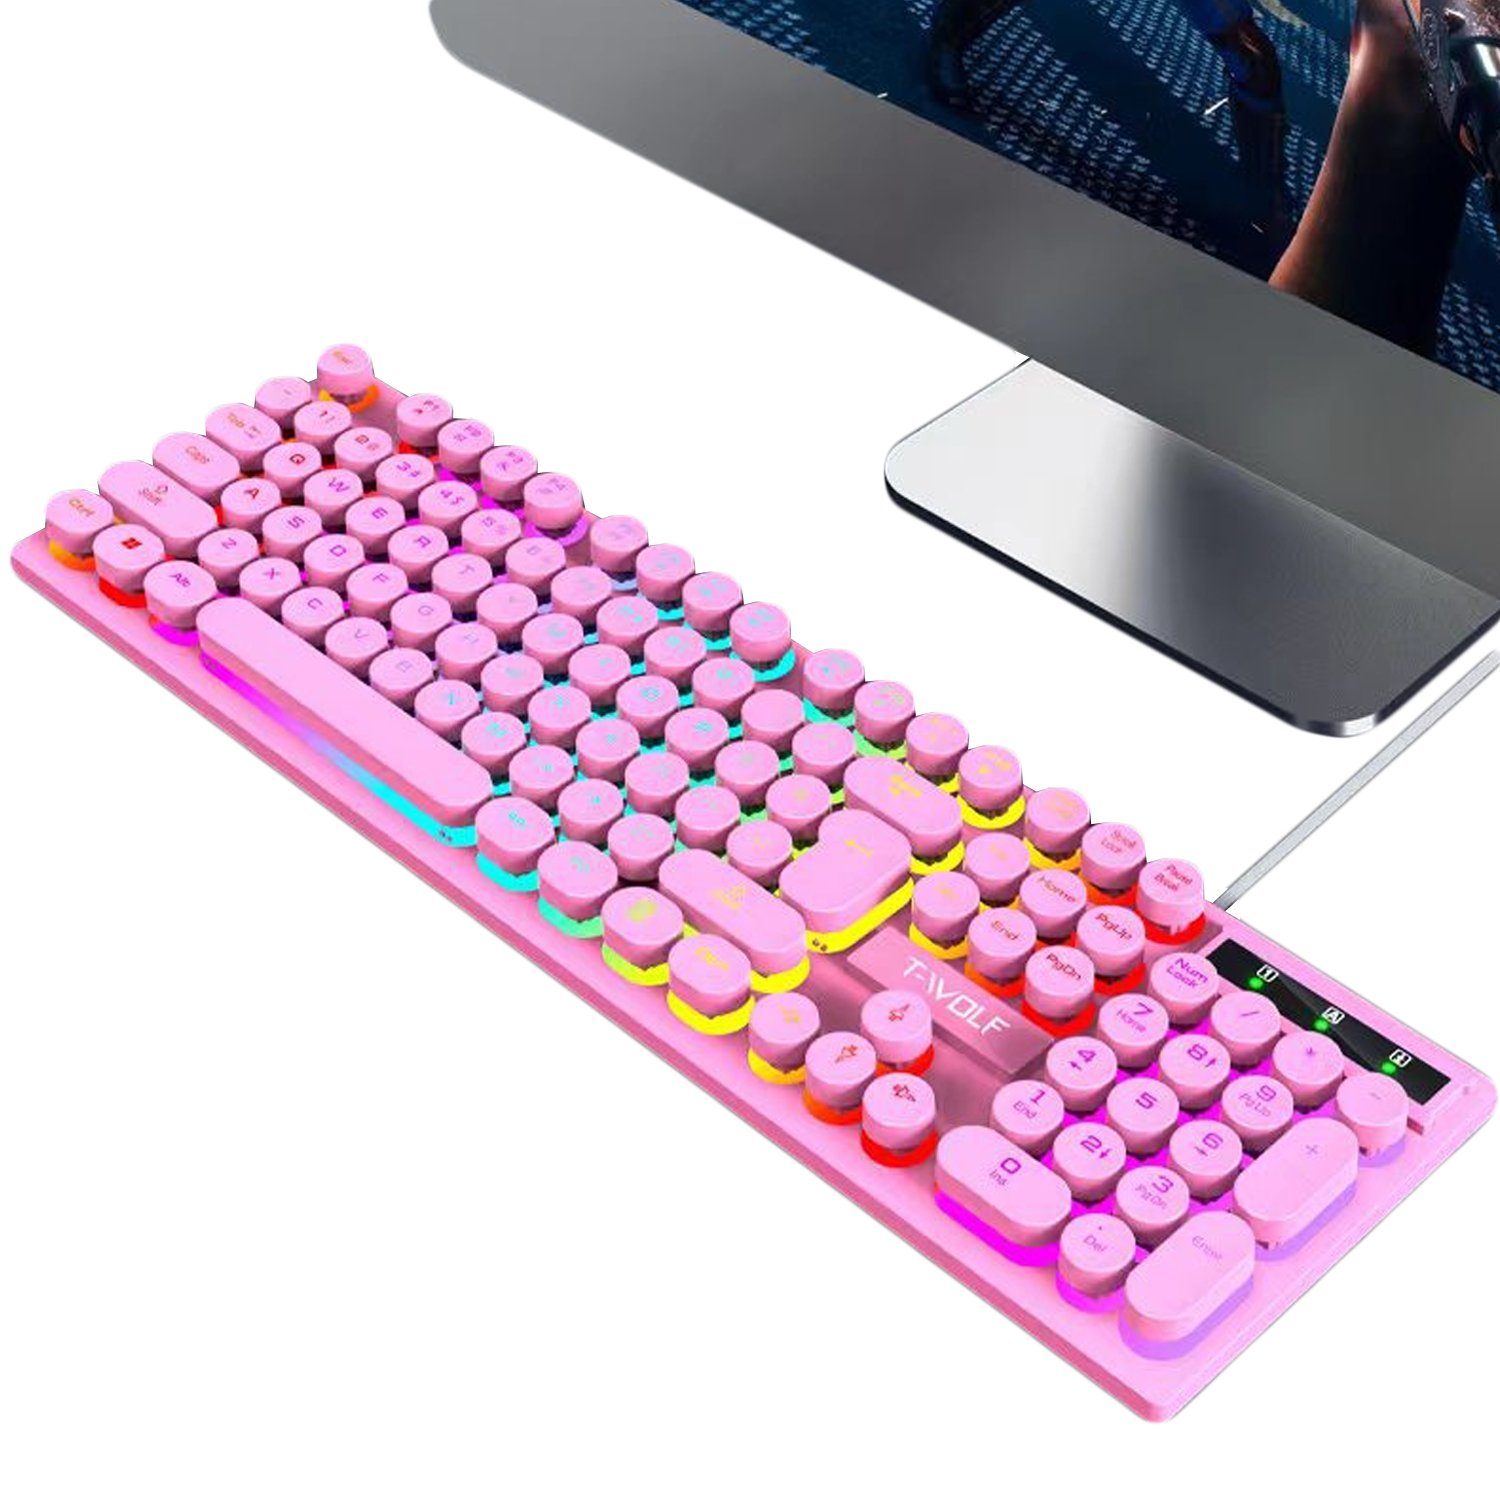 Gaming Keyboards&comma; PC Keyboards&comma; Competition Keyboards&comma; Pink Gaming Keyboard &lpar;Wired Keyboard with LED Light for Gamers&sol;Workers 104 Keys&rpar;